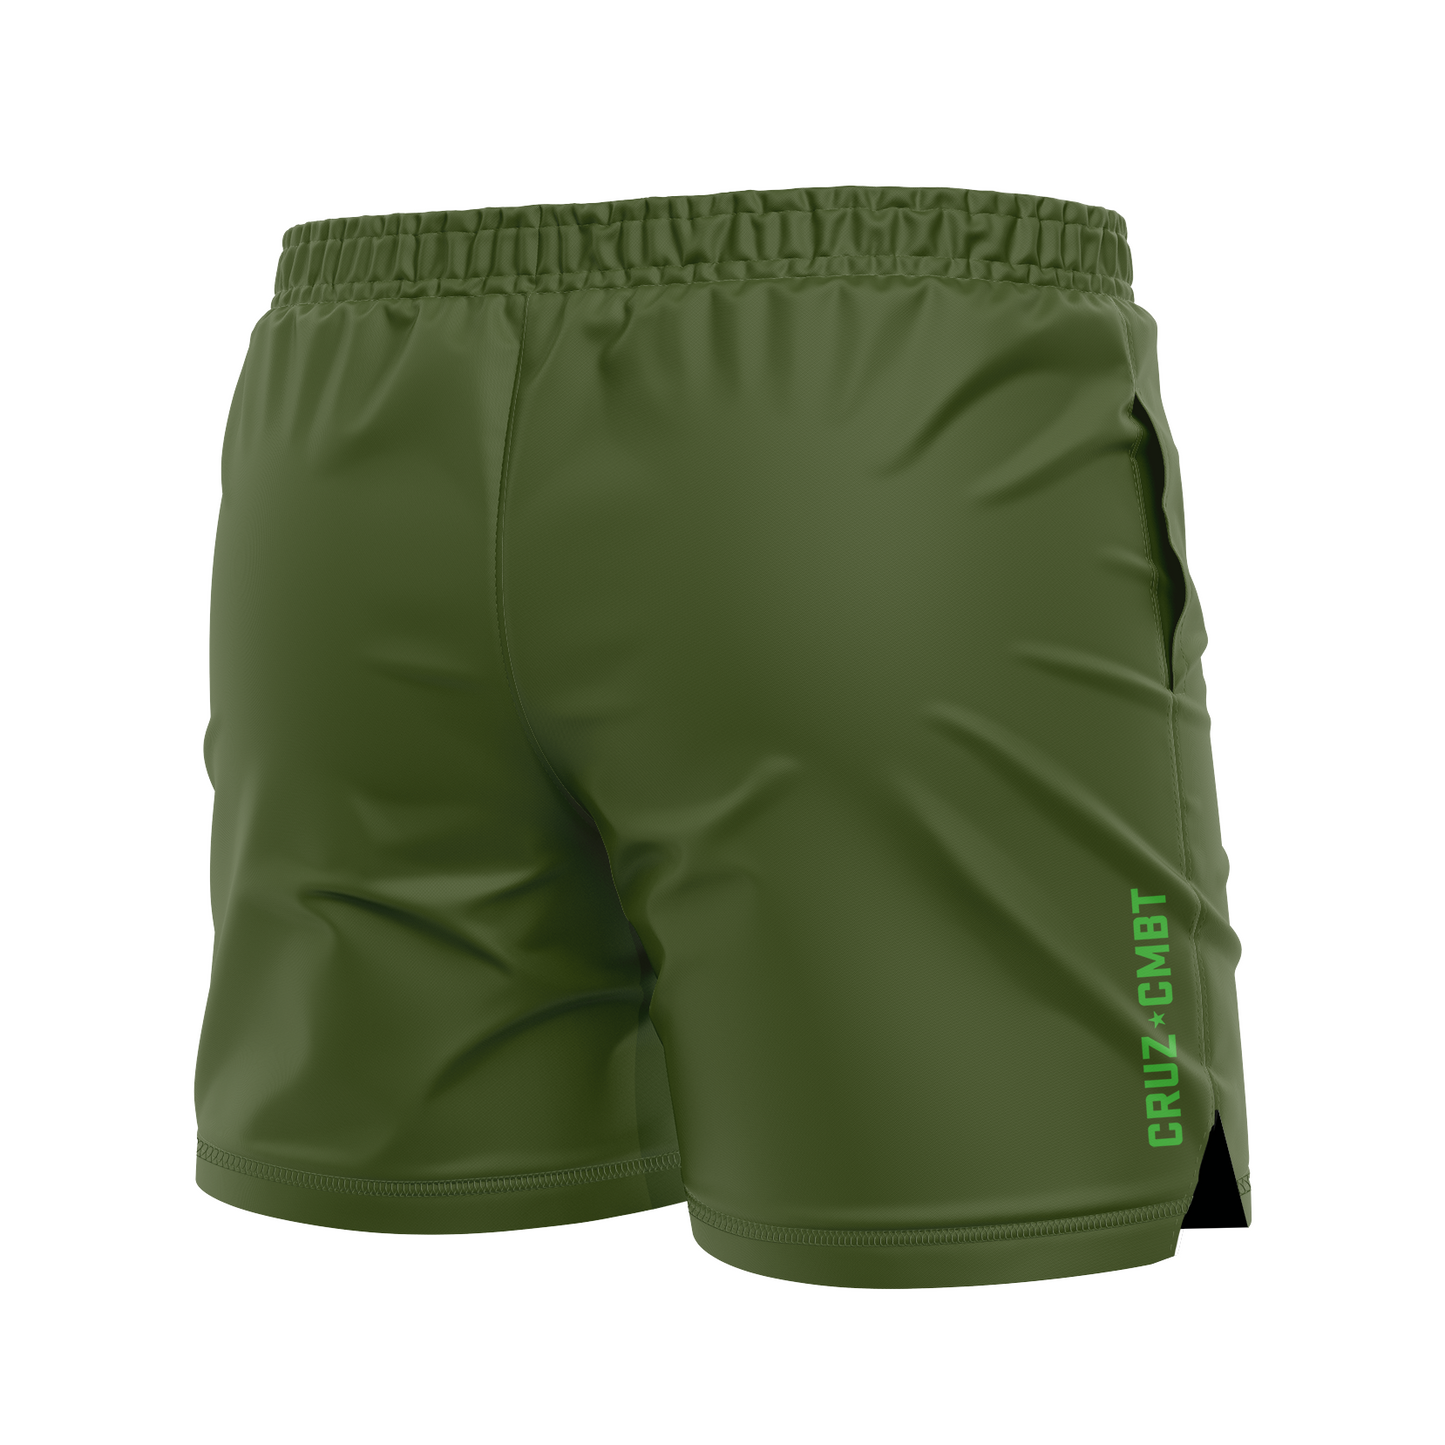 Base Collection men's FC shorts, o.d. and neon green